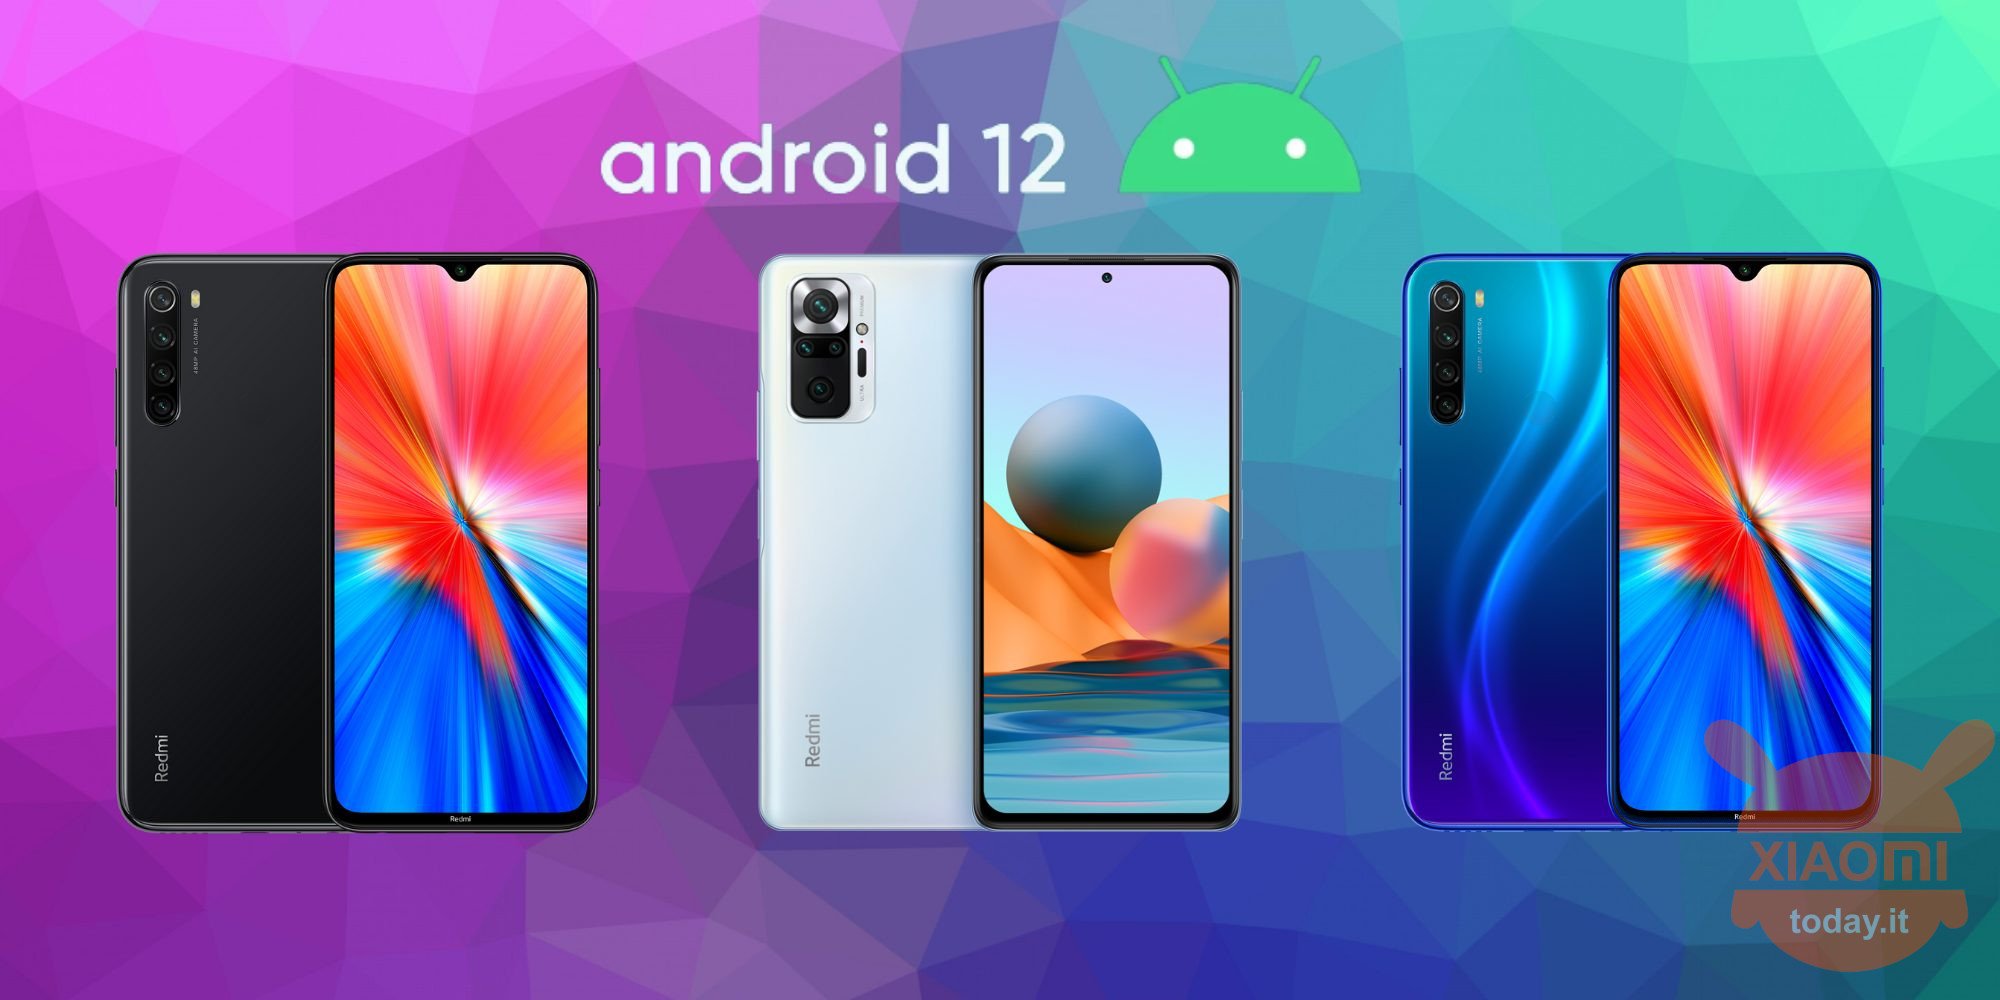 redmi note 8, redmi note 8t e redmi note 10 pro si aggiornano ad android 12